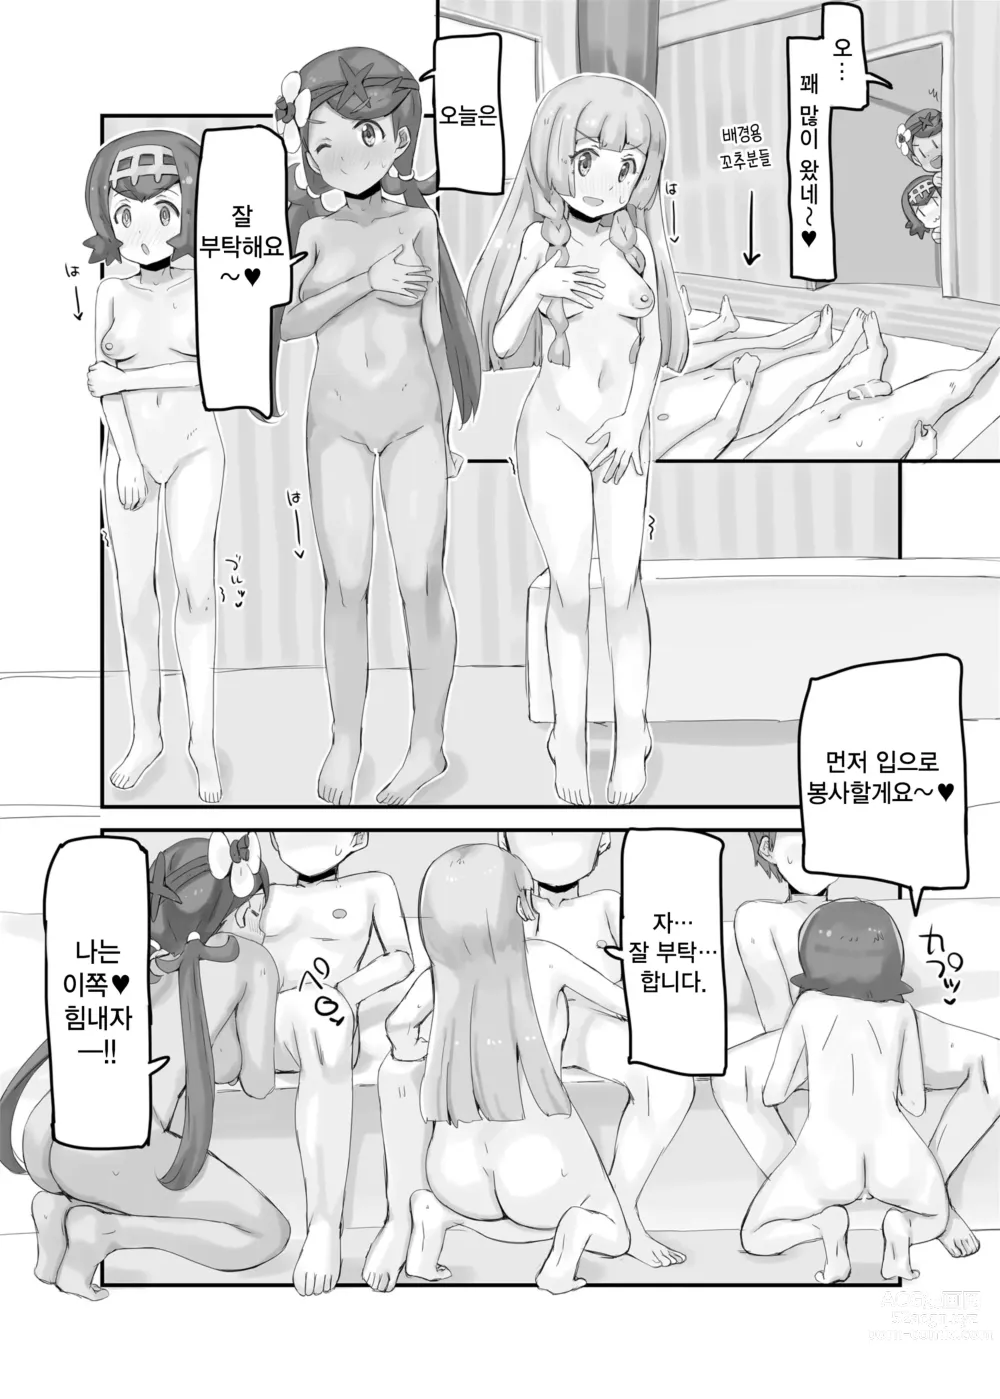 Page 7 of doujinshi 알로라류 용돈벌이 대작전!